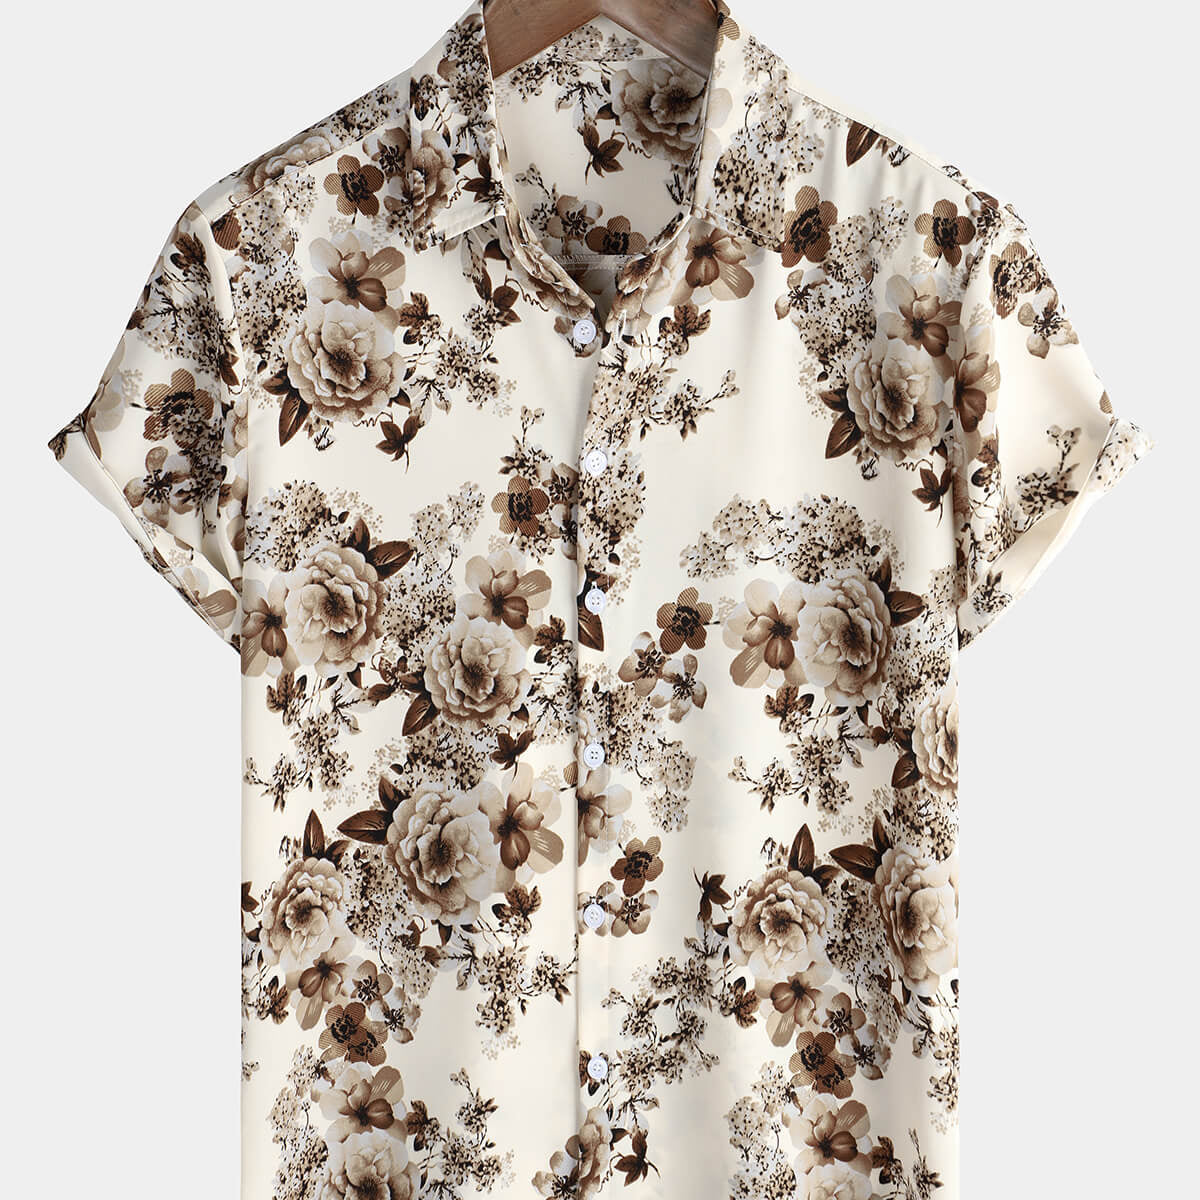 Men's Beige Casual Floral Holiday Short Sleeve Summer Button Up Shirt